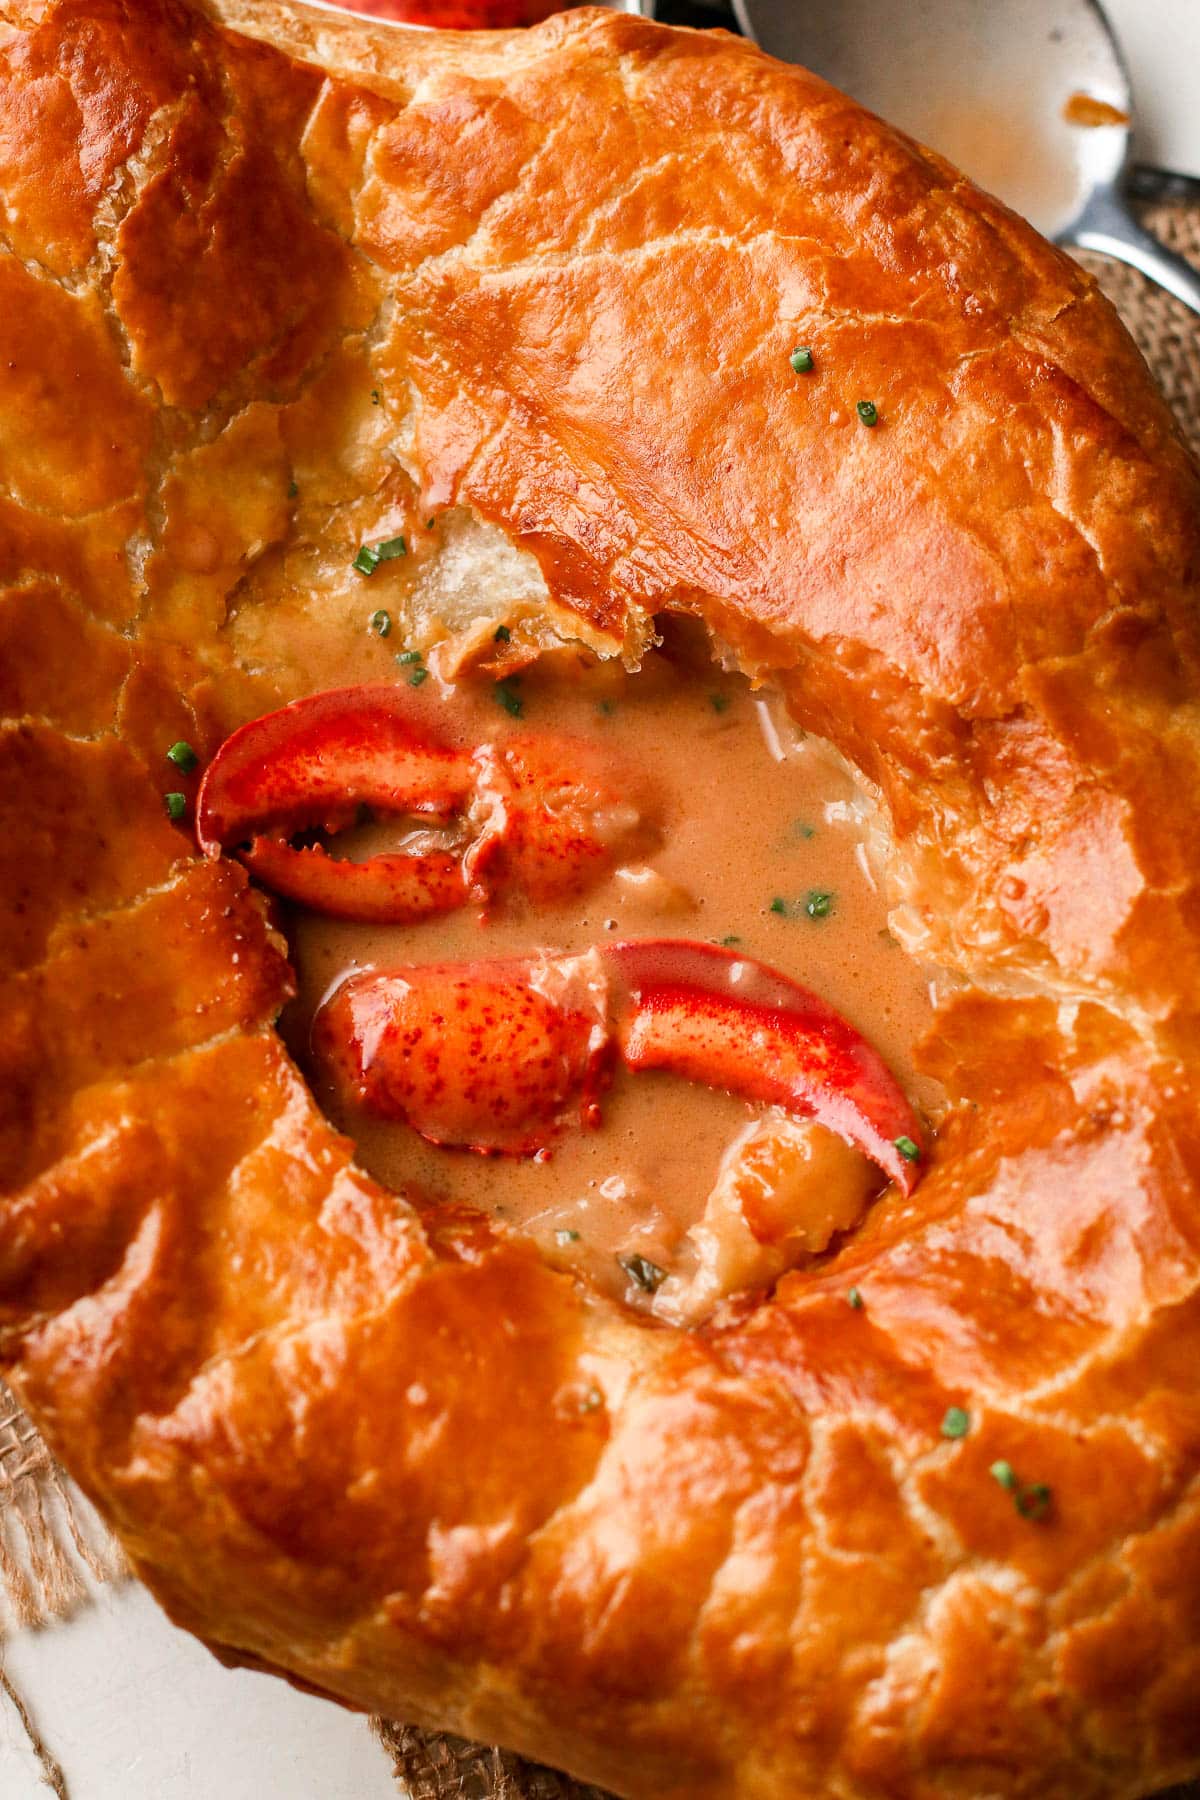 pot pie broken into with lobster claws exposed.